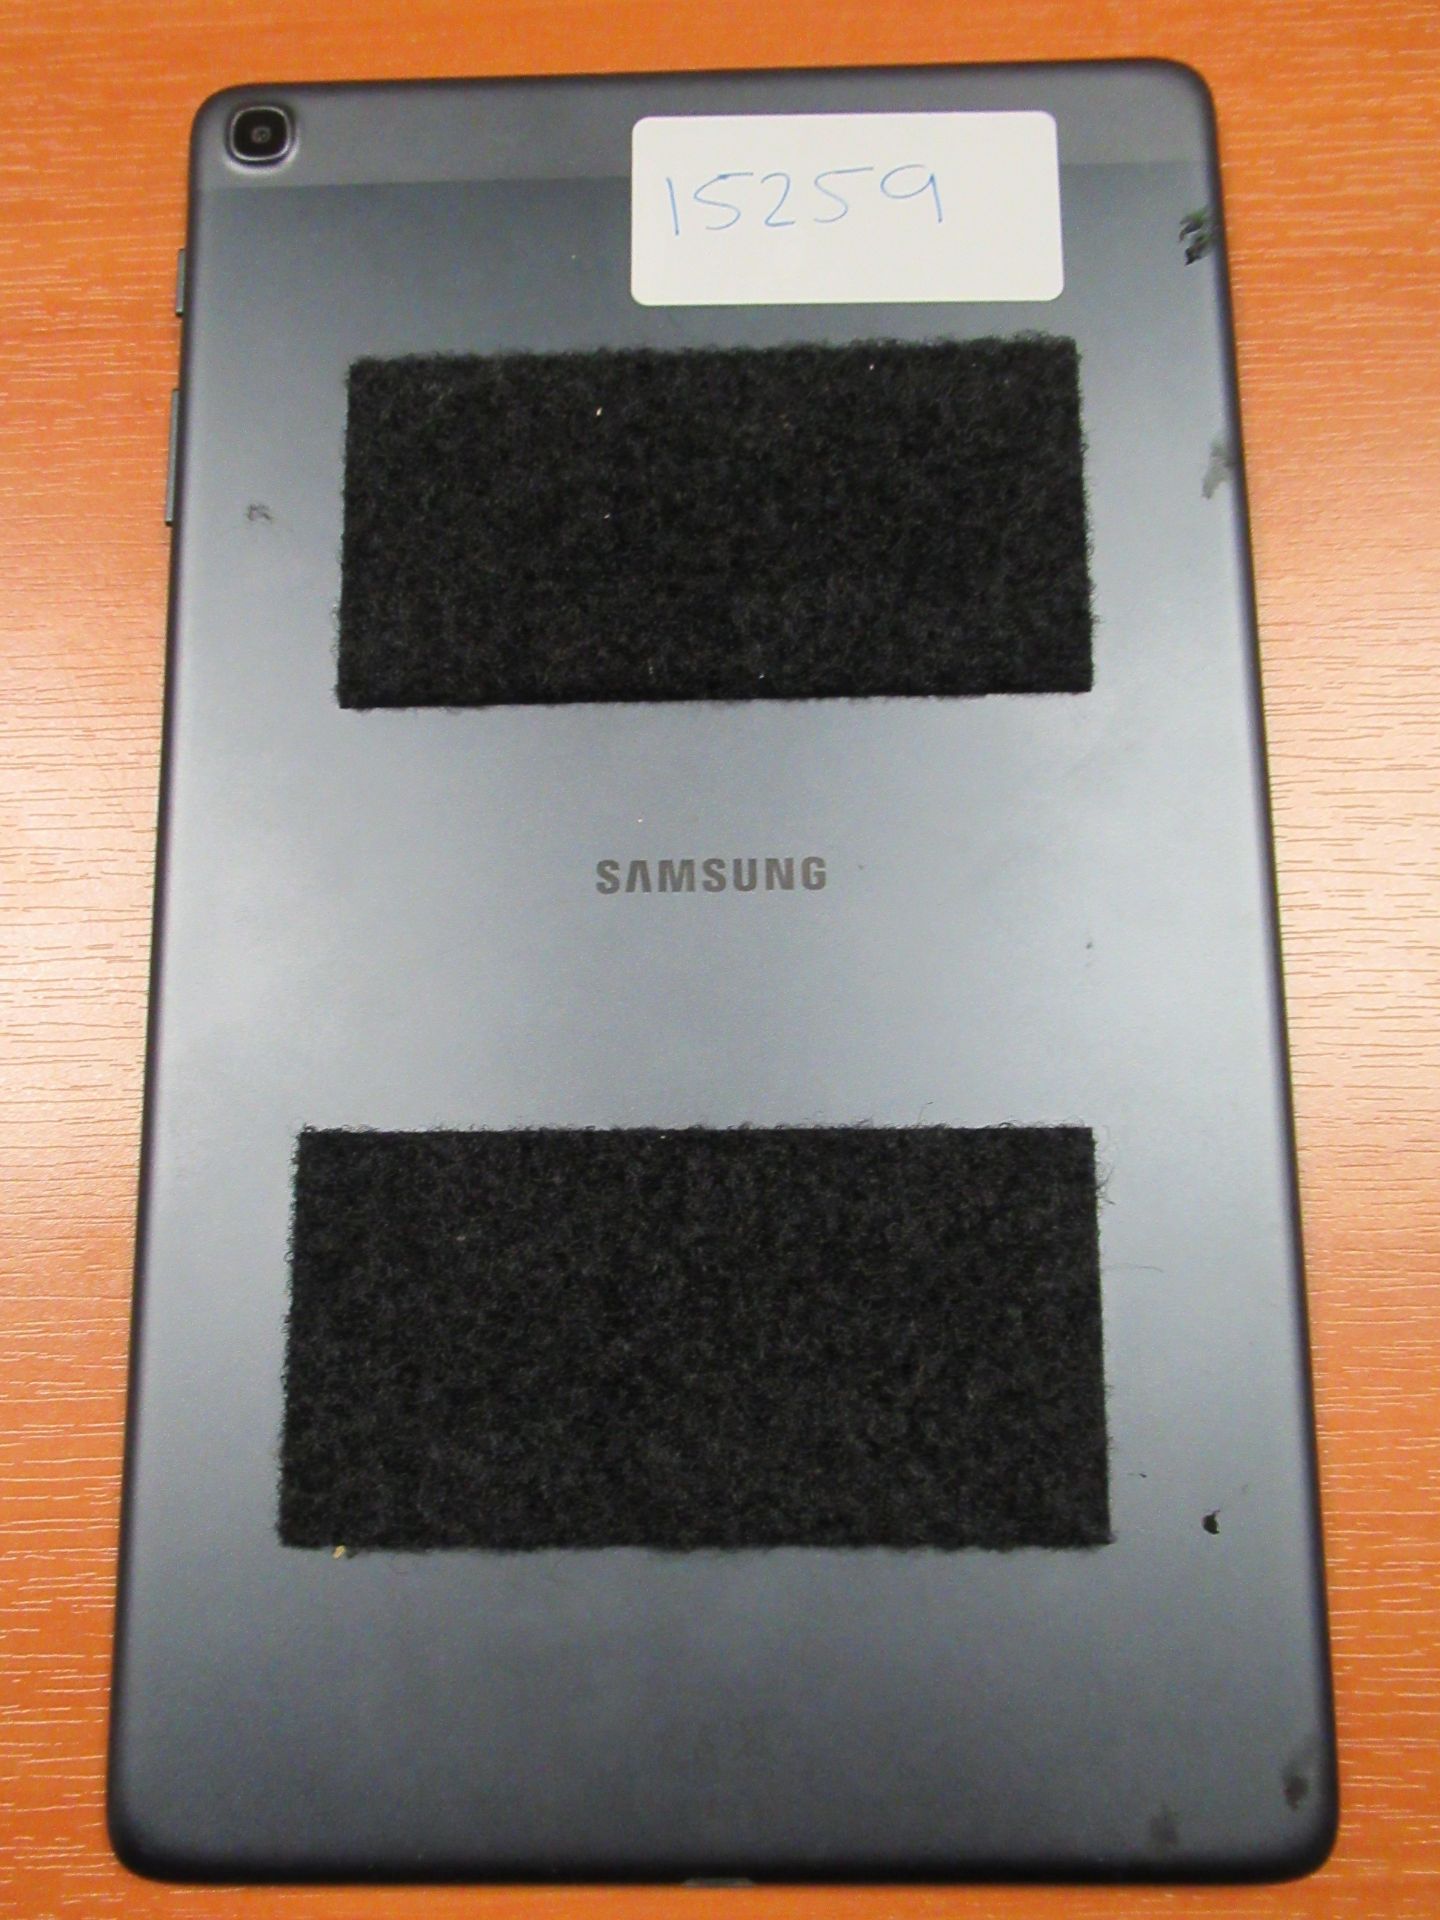 Samsung Galaxy Tab A (no charger) SM-T510 in space grey - Image 2 of 3